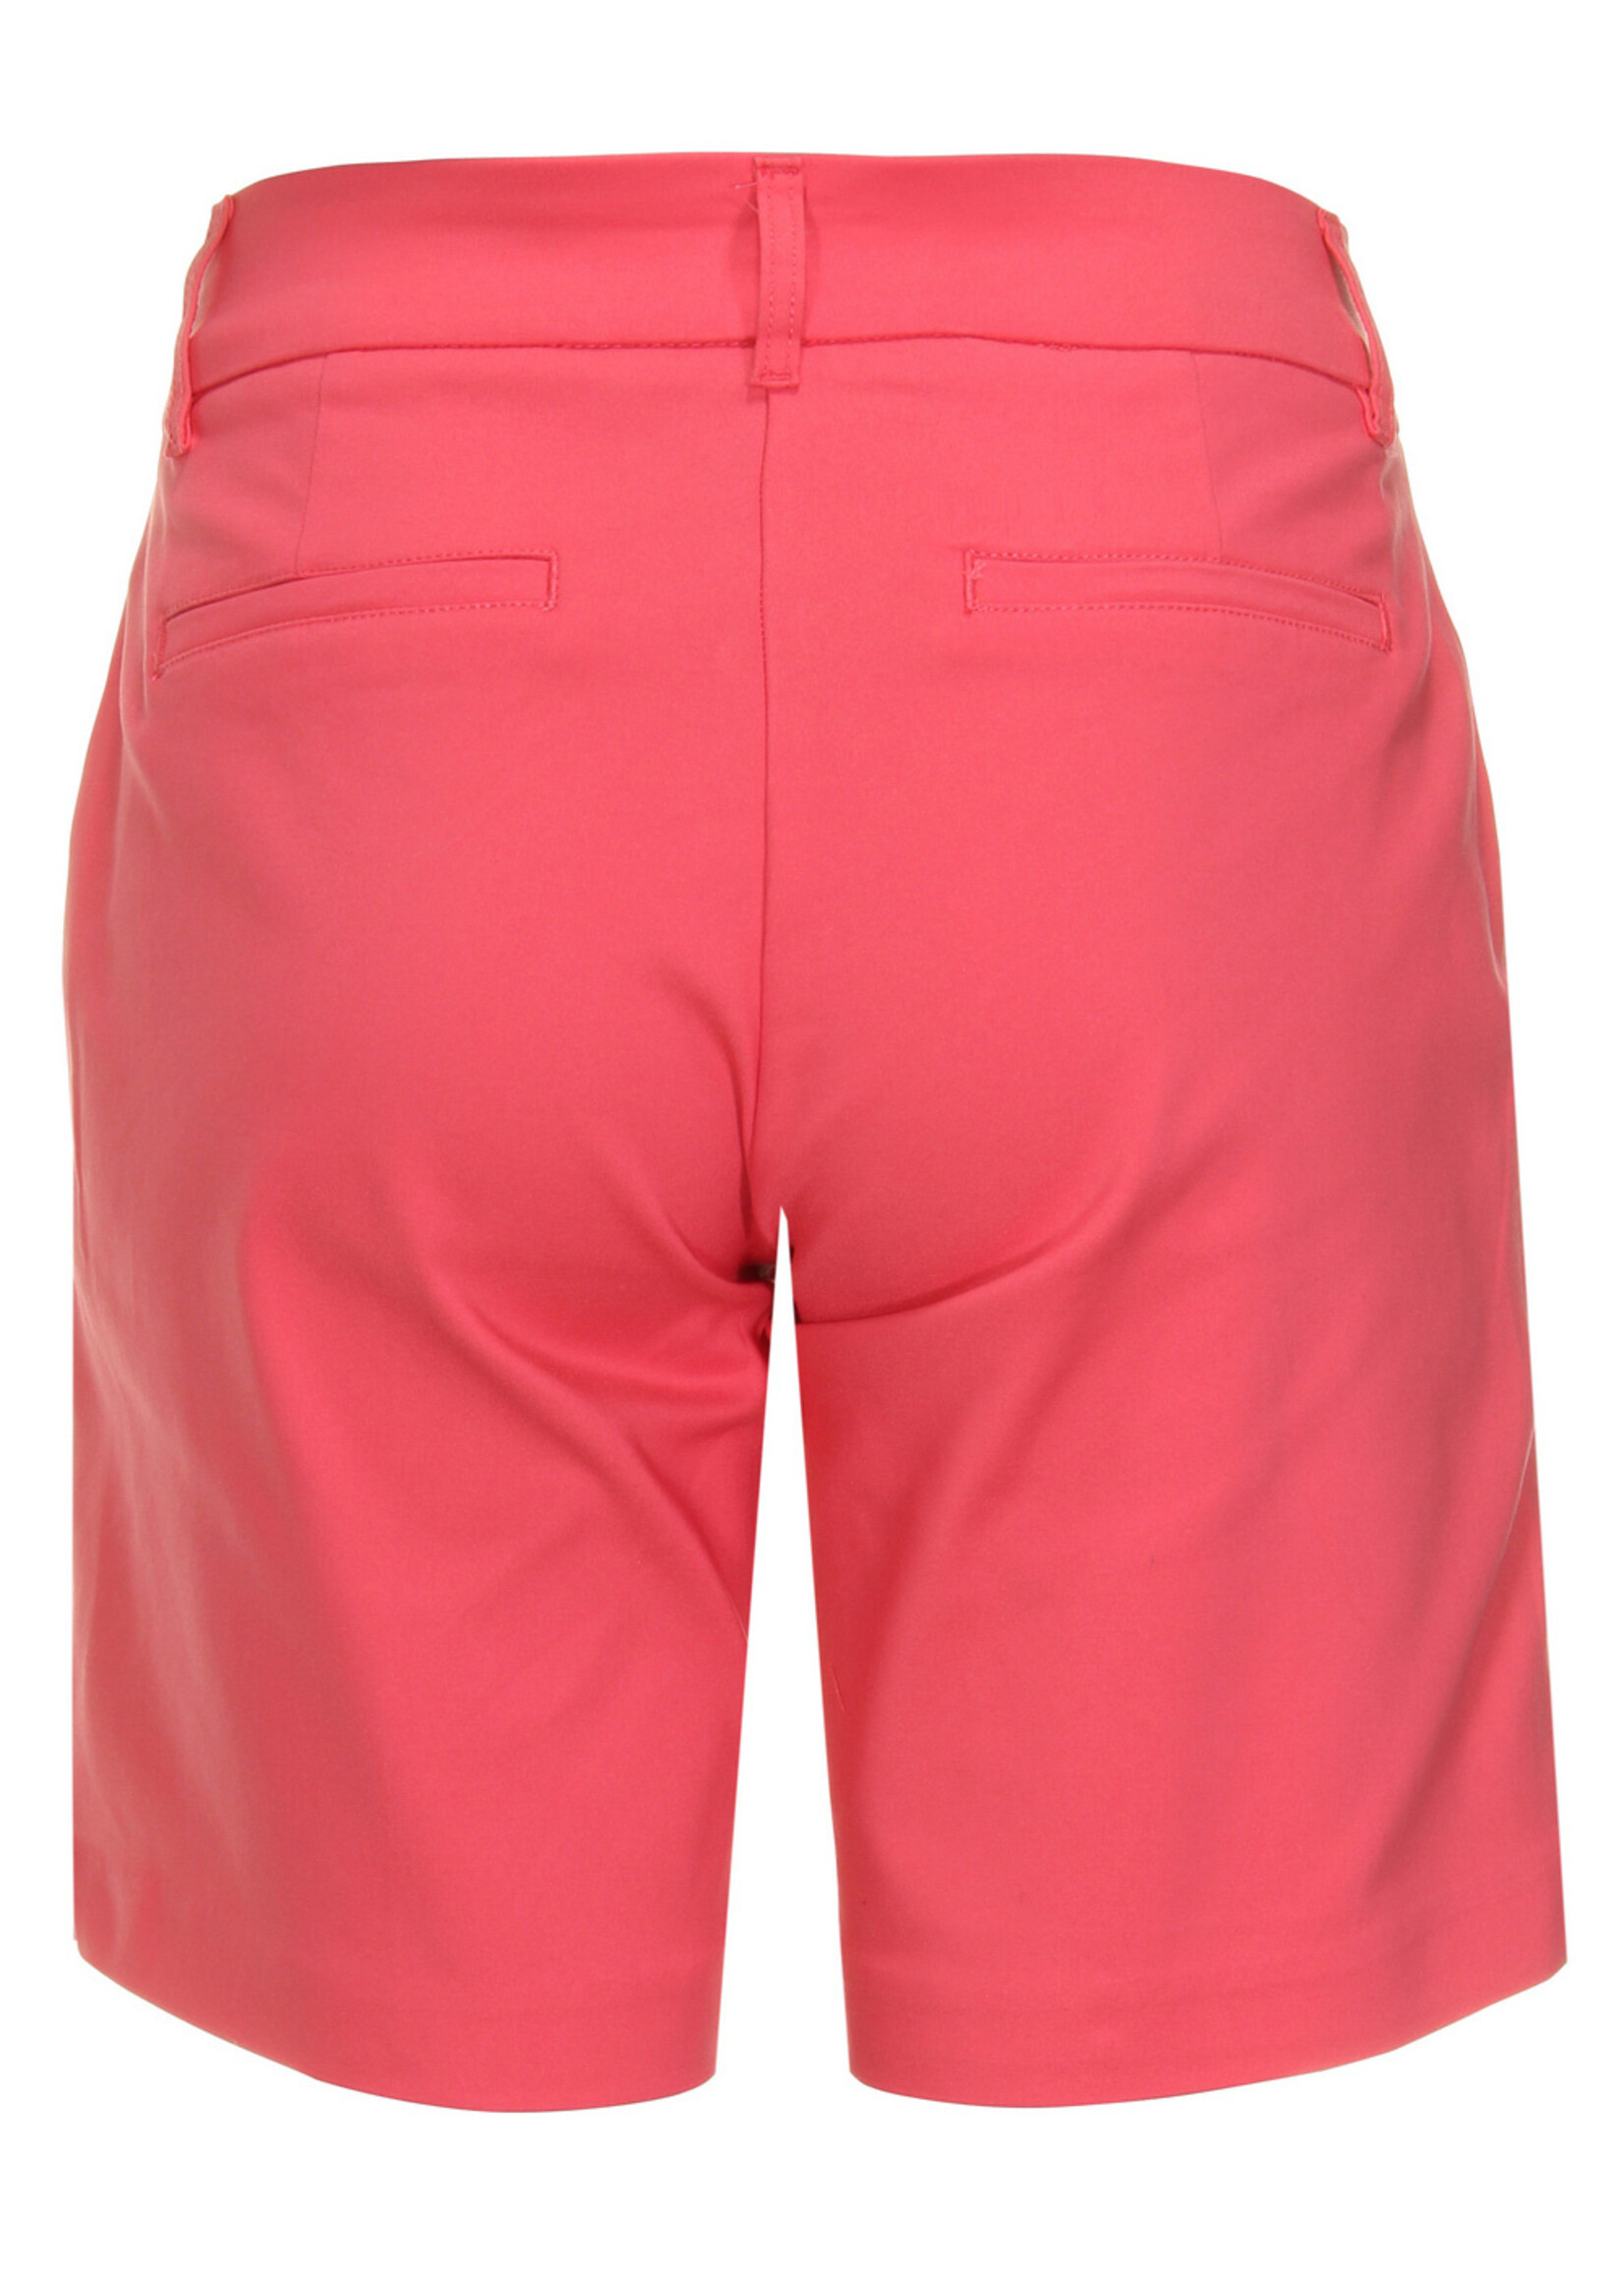 Red Button Short ava smart coral srb4176